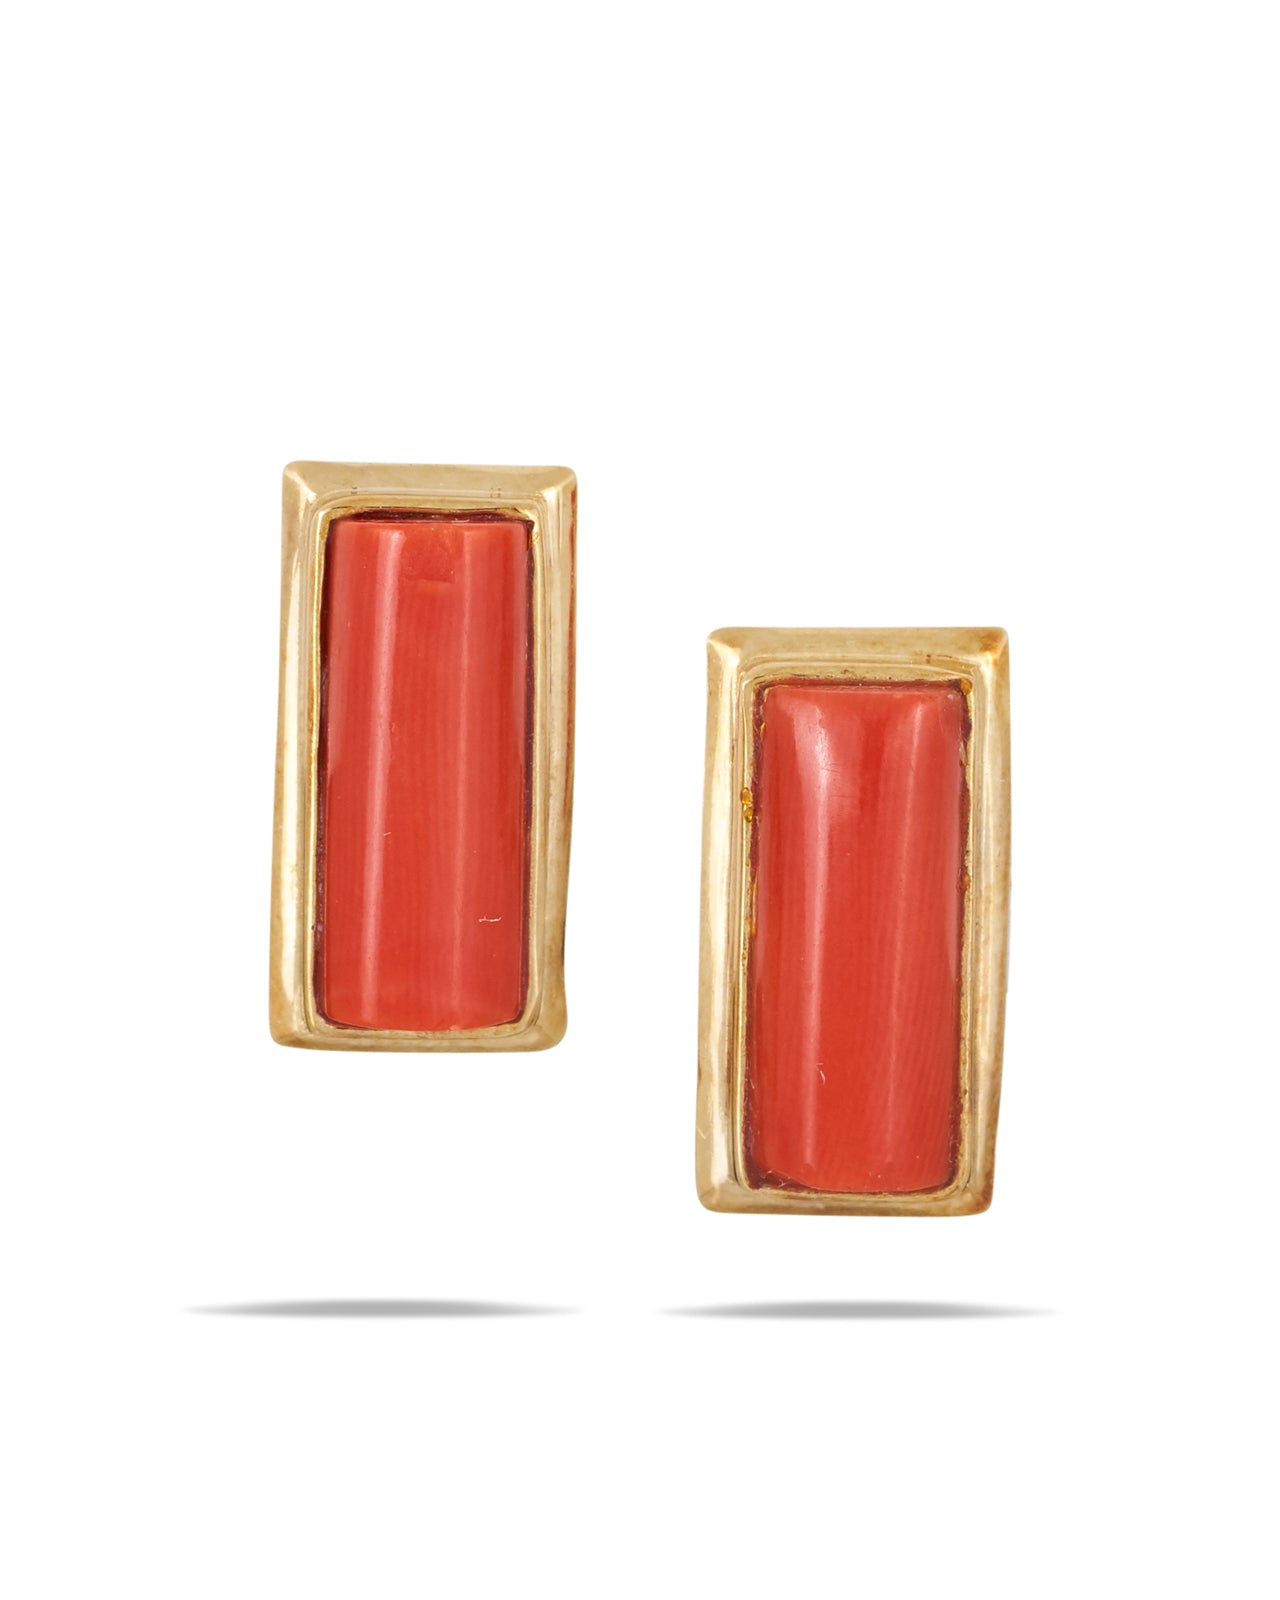 Vintage gold & red coral earrings